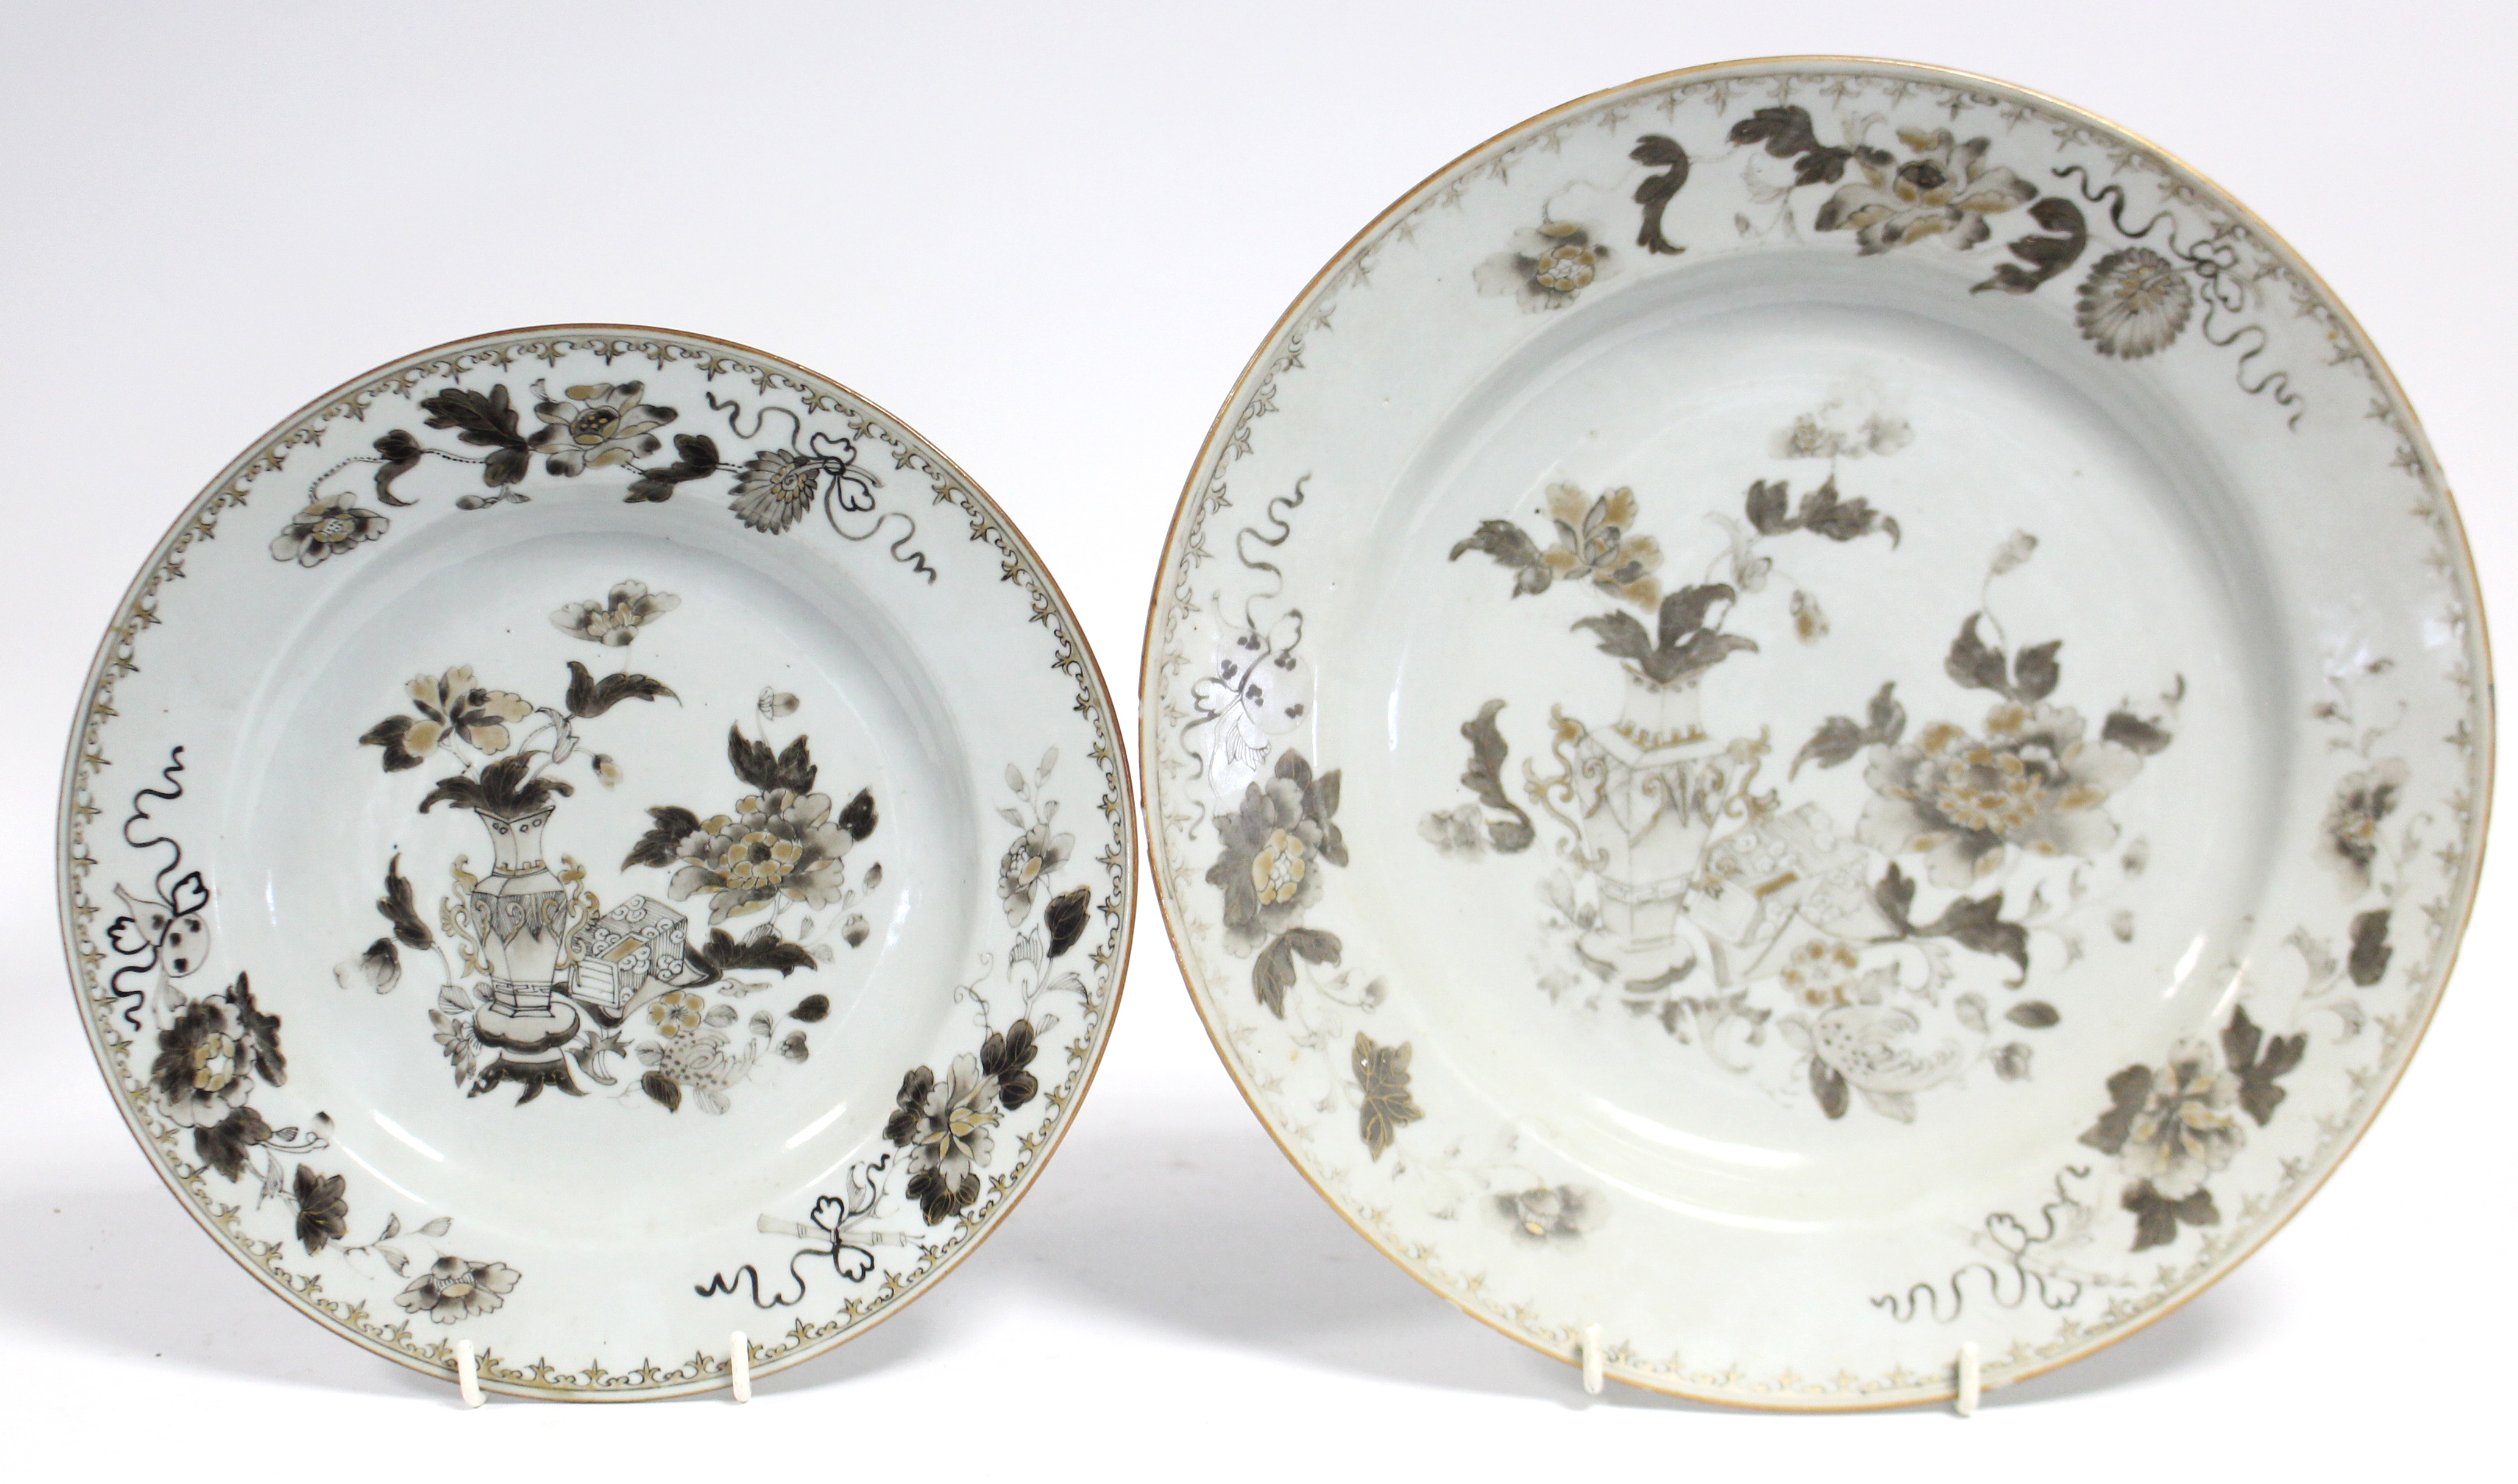 An 18th century Chinese porcelain large shallow dish painted en-grisaille & gilt with peonies & a